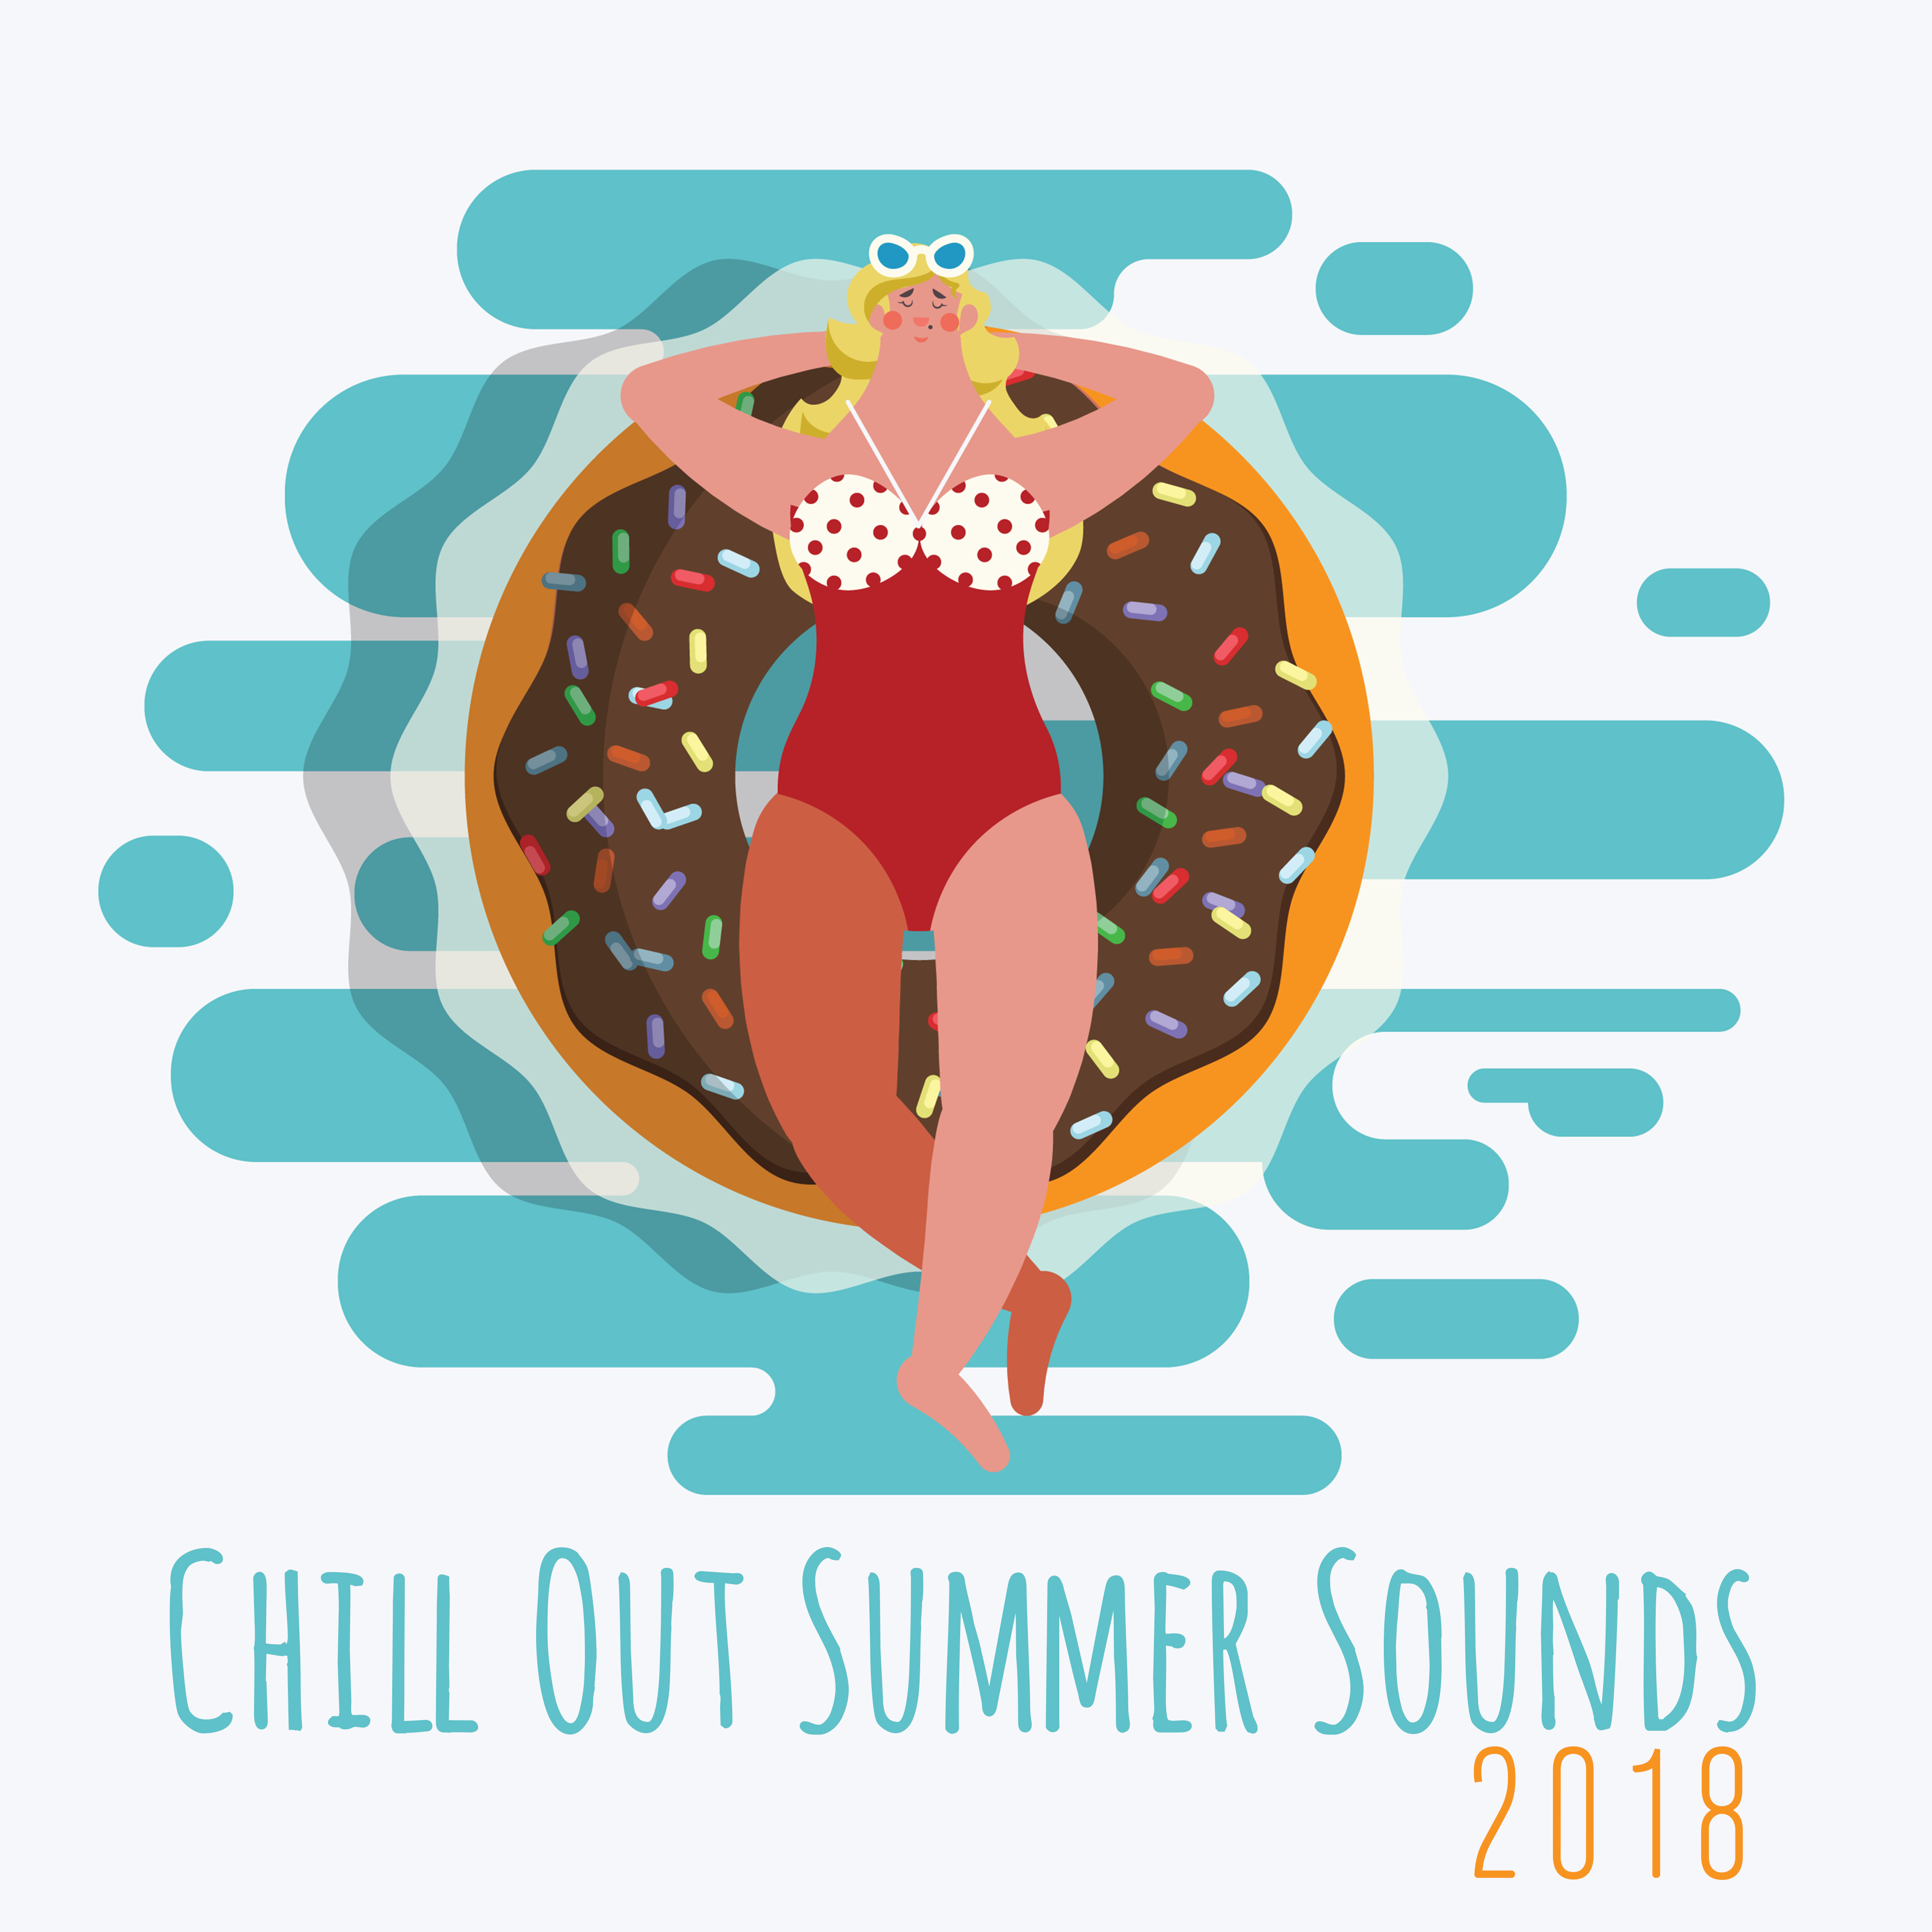 Chill Out Summer Sounds 2018